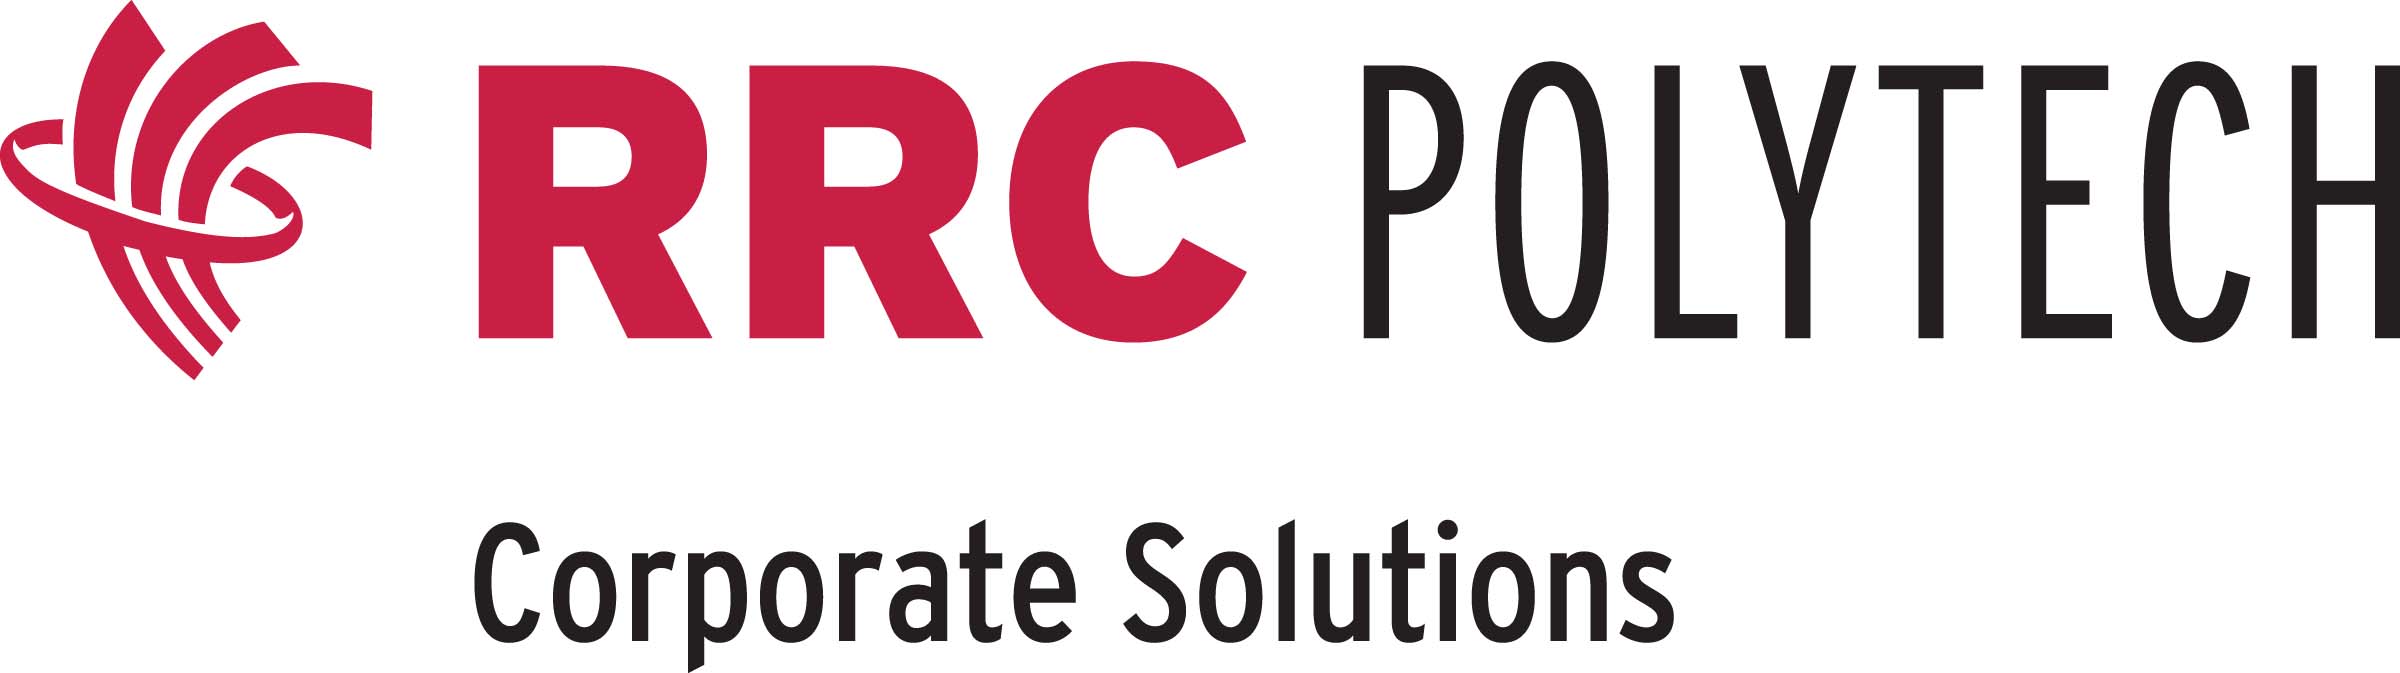 RRC Corporate Solutions Logo